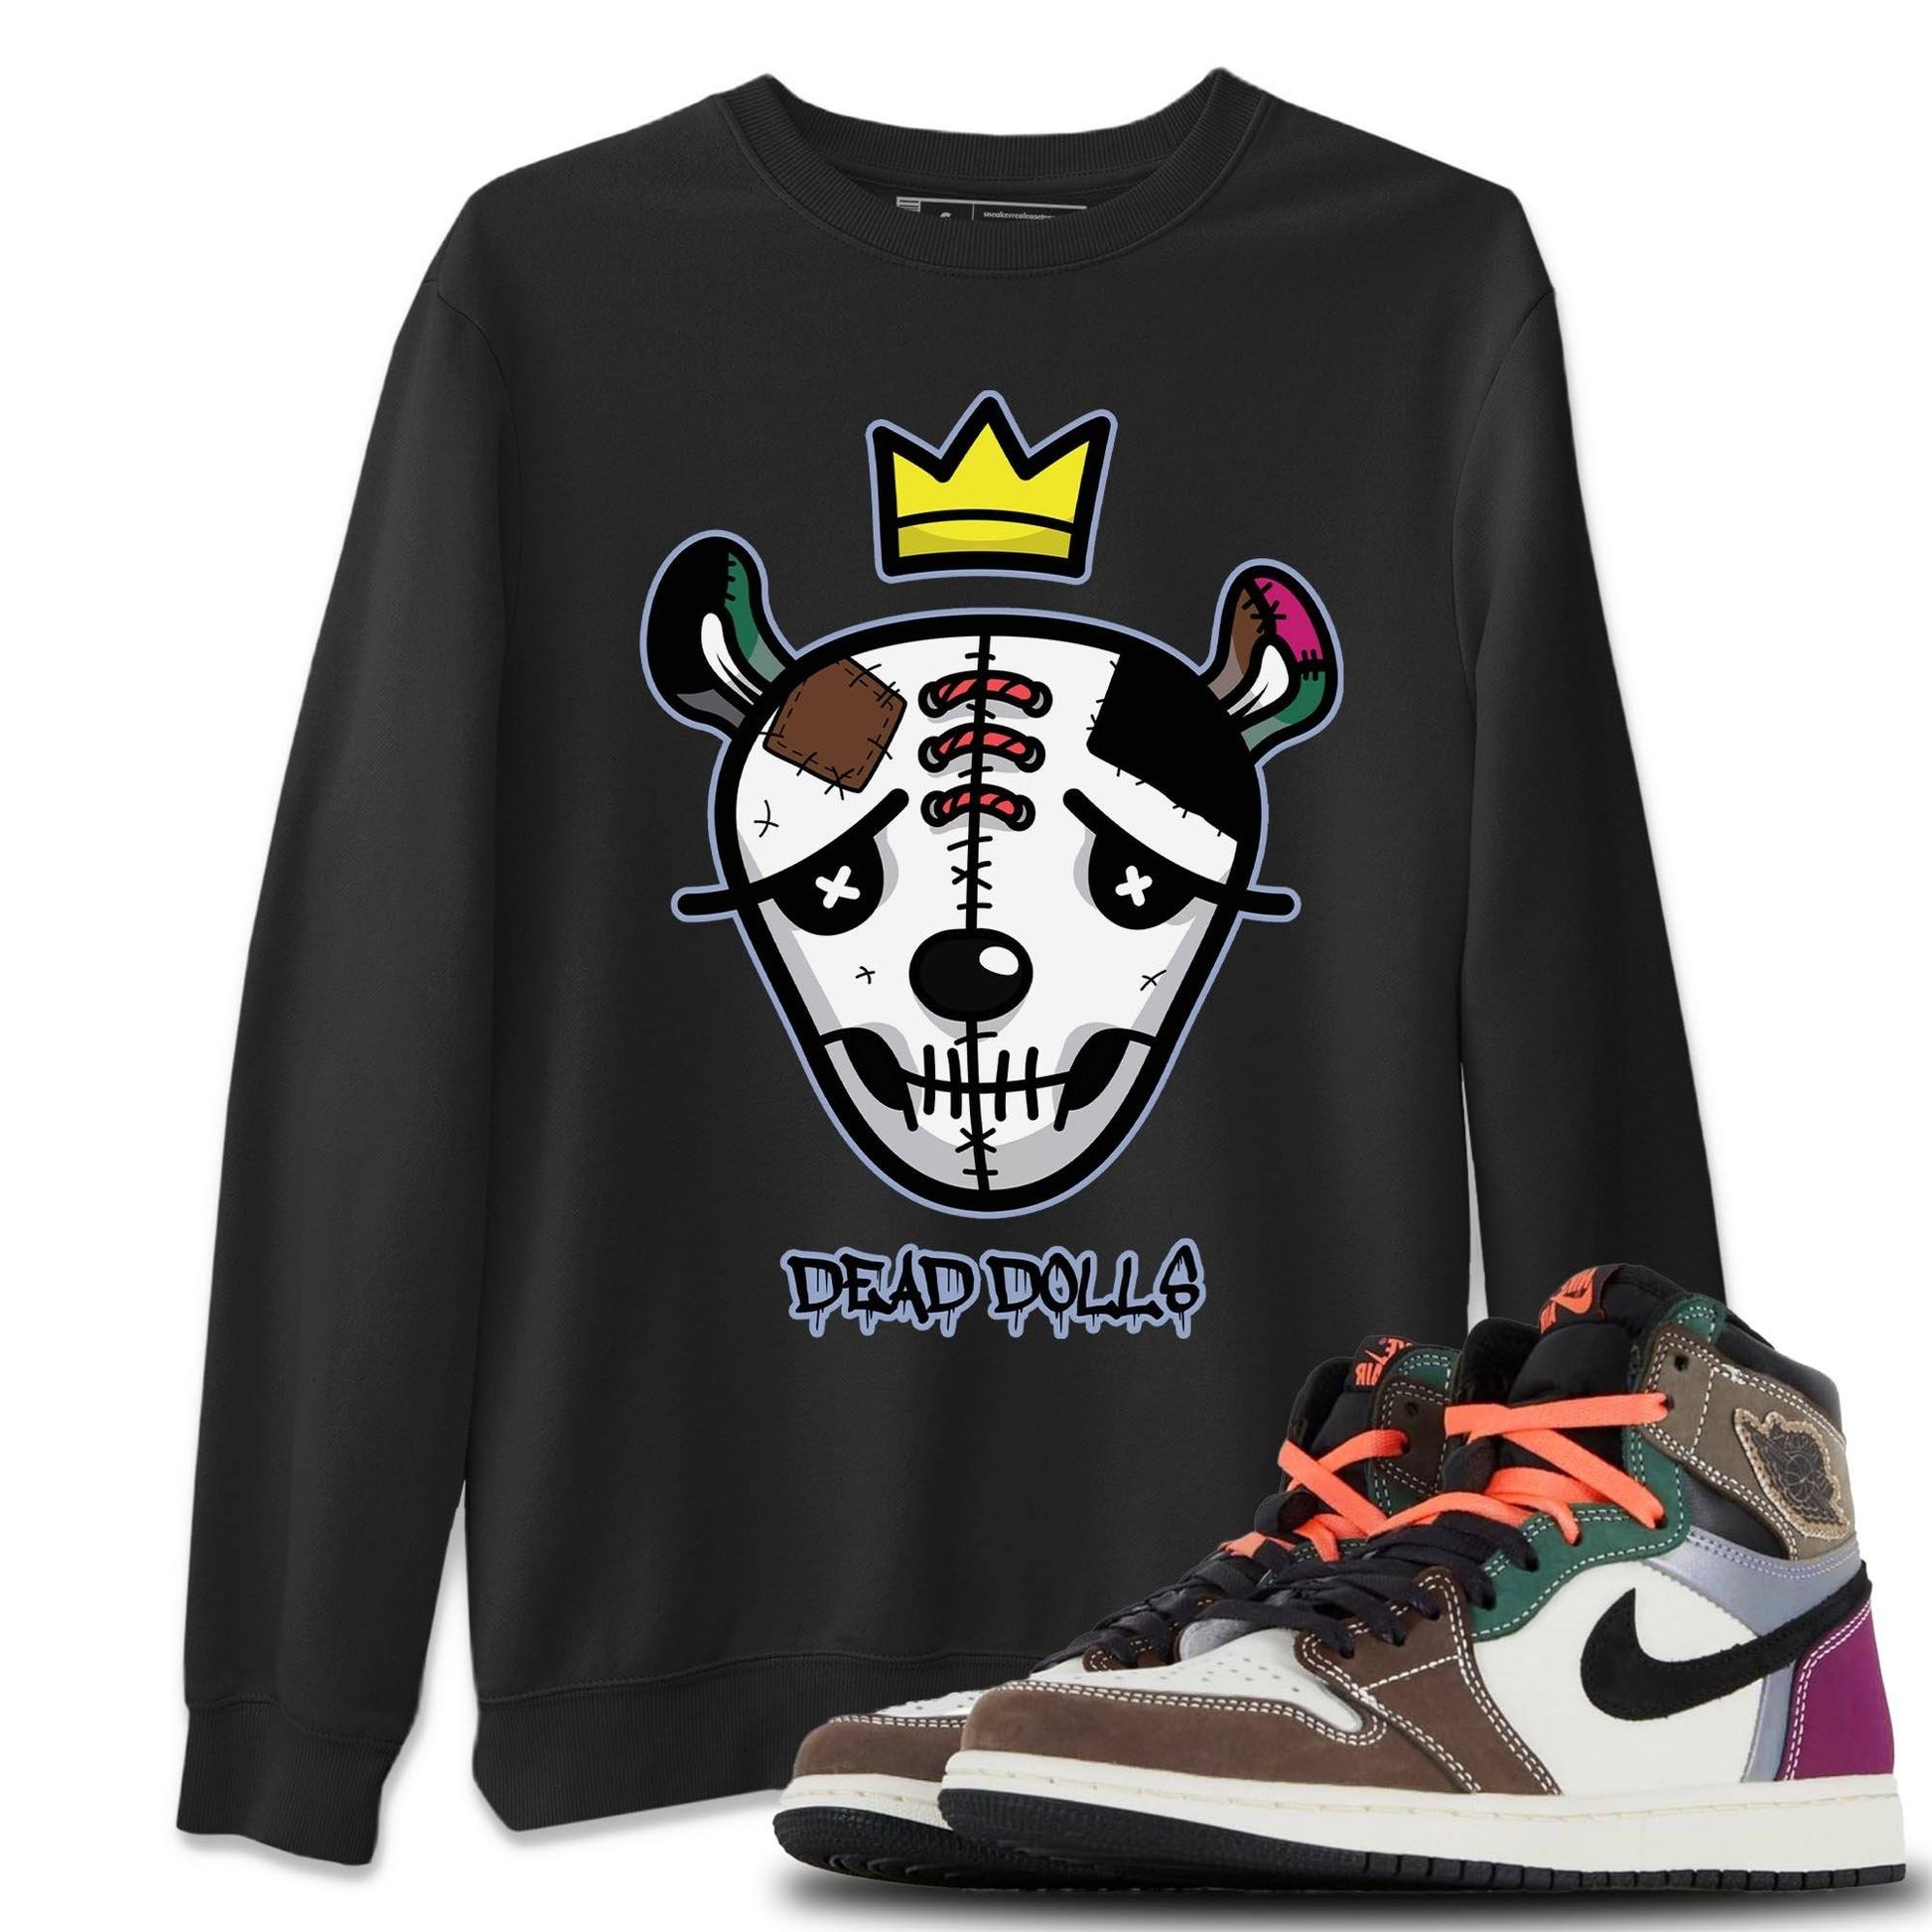 Jordan 1 Hand Crafted Sneaker Match Tees Dead Dolls Face Sneaker Tees Jordan 1 Hand Crafted Sneaker Release Tees Unisex Shirts